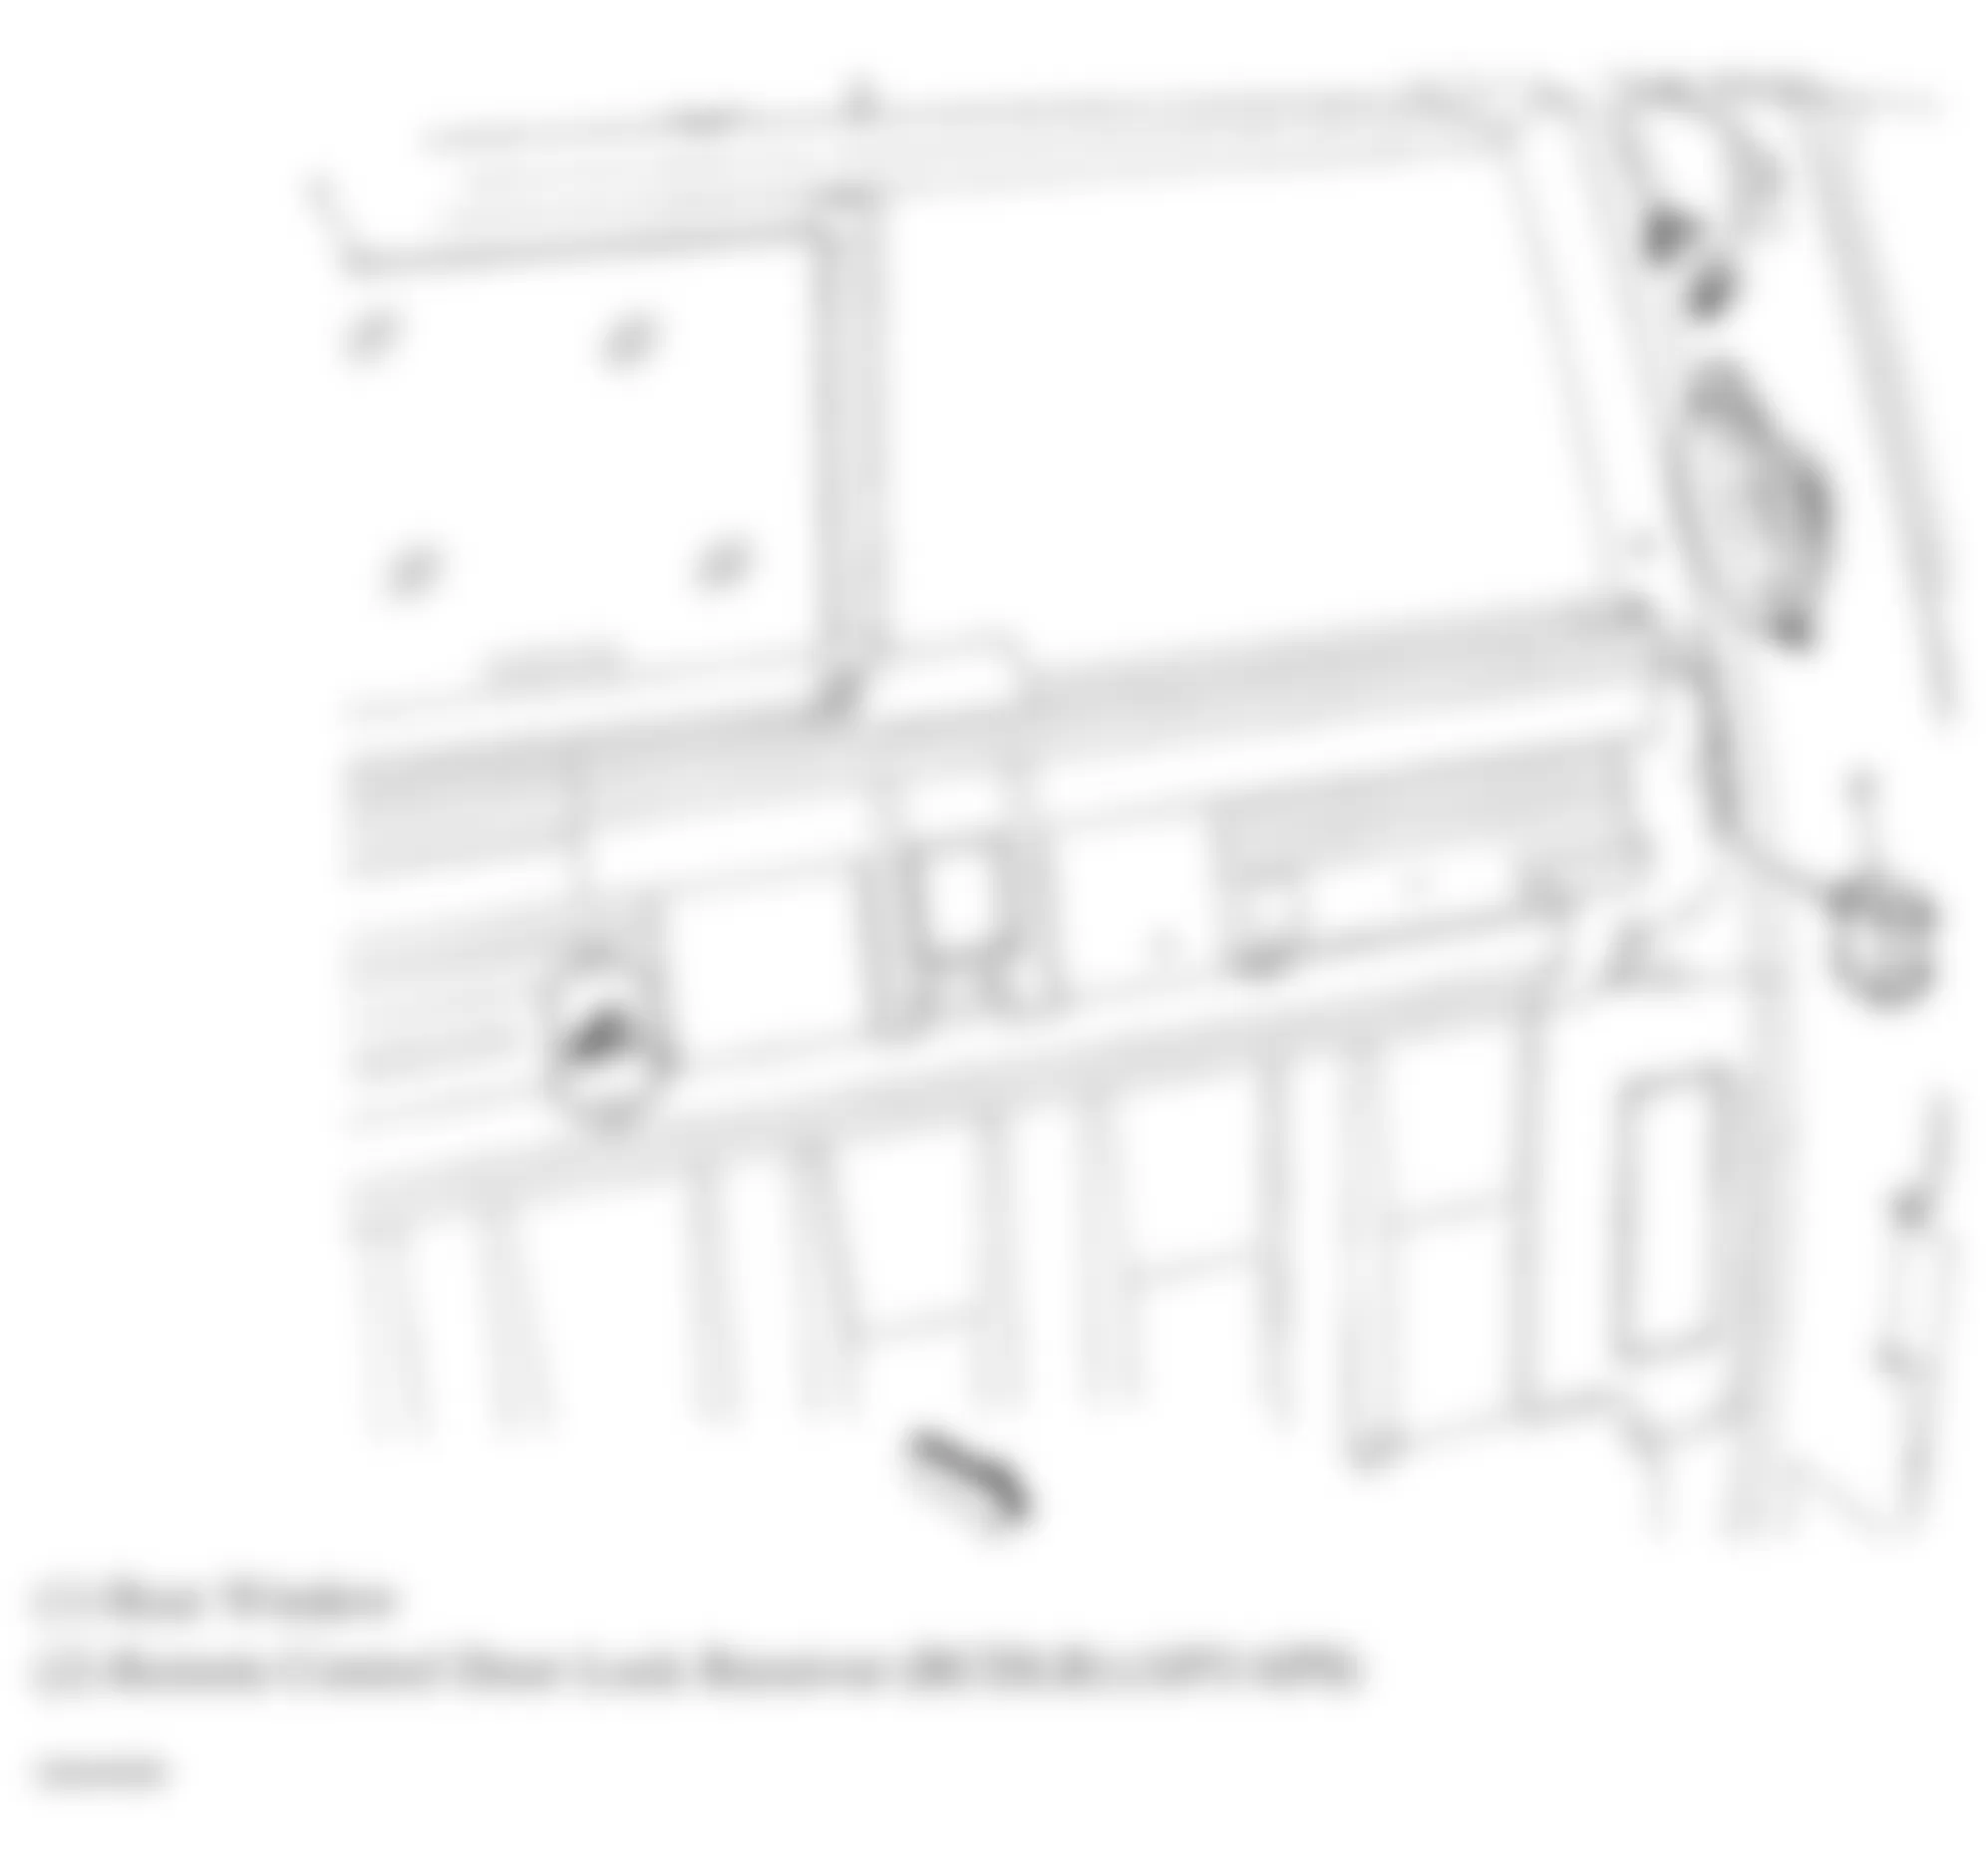 GMC Sierra 1500 2009 - Component Locations -  Left Rear Of Passenger Compartment